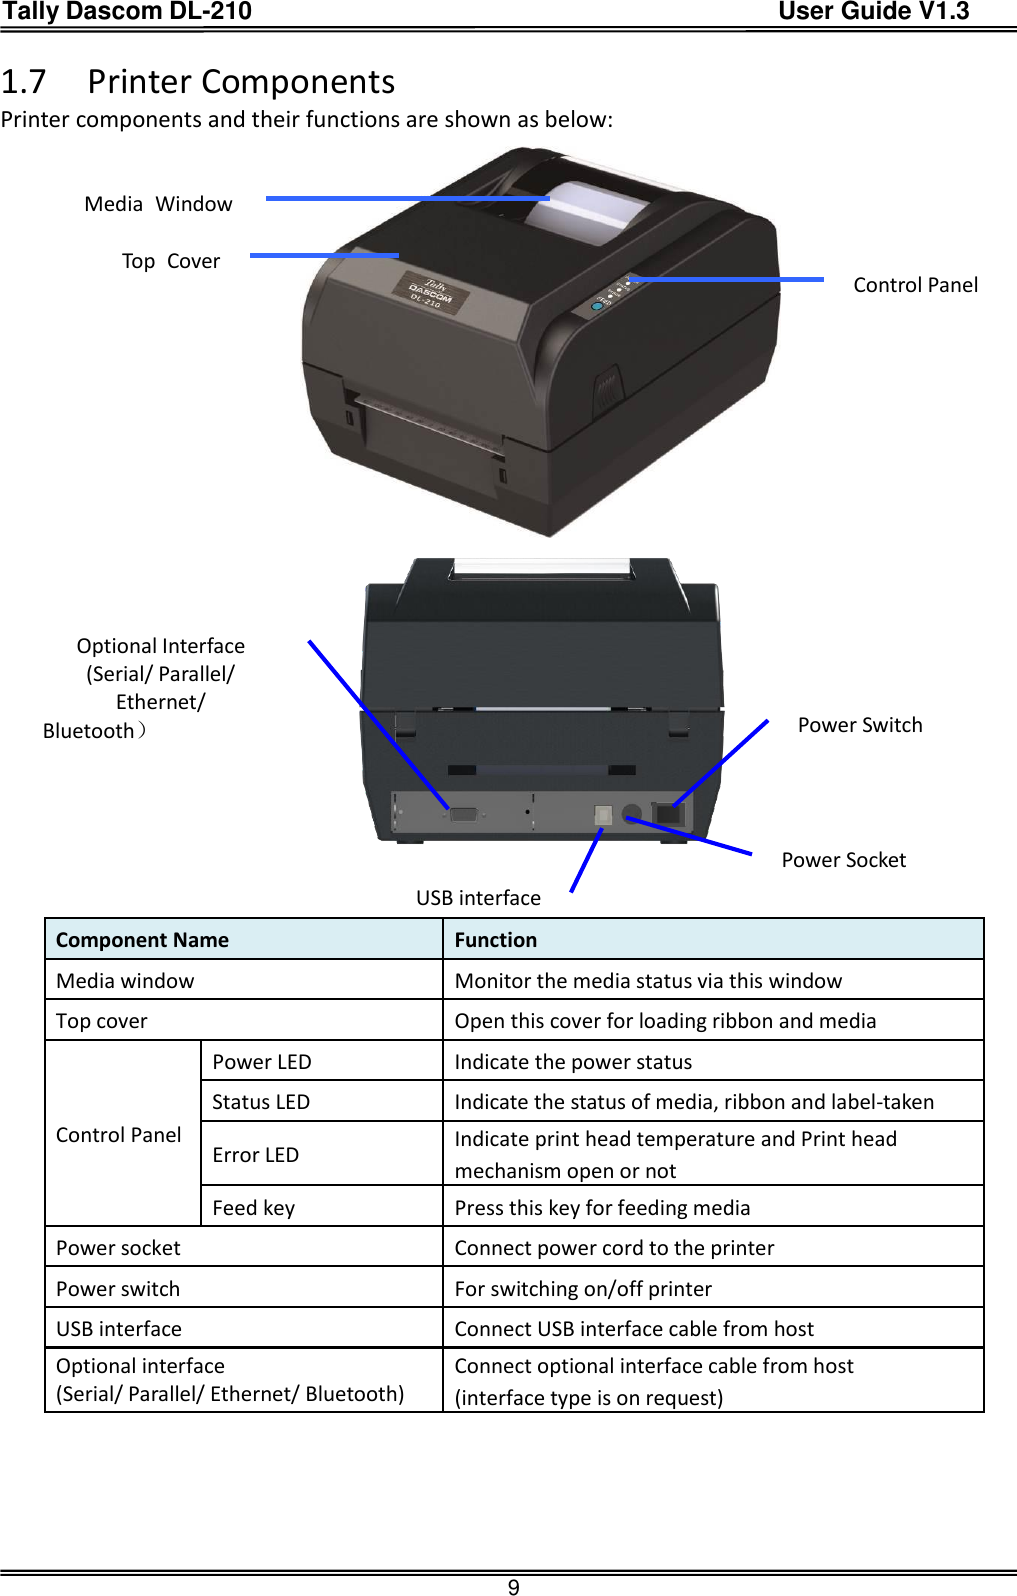 Tally Dascom DL-210                                          User Guide V1.3  9 1.7 Printer Components Printer components and their functions are shown as below:     Component Name Function Media window Monitor the media status via this window Top cover Open this cover for loading ribbon and media Control Panel Power LED Indicate the power status Status LED Indicate the status of media, ribbon and label-taken   Error LED Indicate print head temperature and Print head mechanism open or not Feed key Press this key for feeding media Power socket Connect power cord to the printer Power switch For switching on/off printer USB interface Connect USB interface cable from host Optional interface (Serial/ Parallel/ Ethernet/ Bluetooth) Connect optional interface cable from host (interface type is on request)     Control Panel Top  Cover Media  Window Power Switch Optional Interface (Serial/ Parallel/ Ethernet/ Bluetooth） USB interface Power Socket 